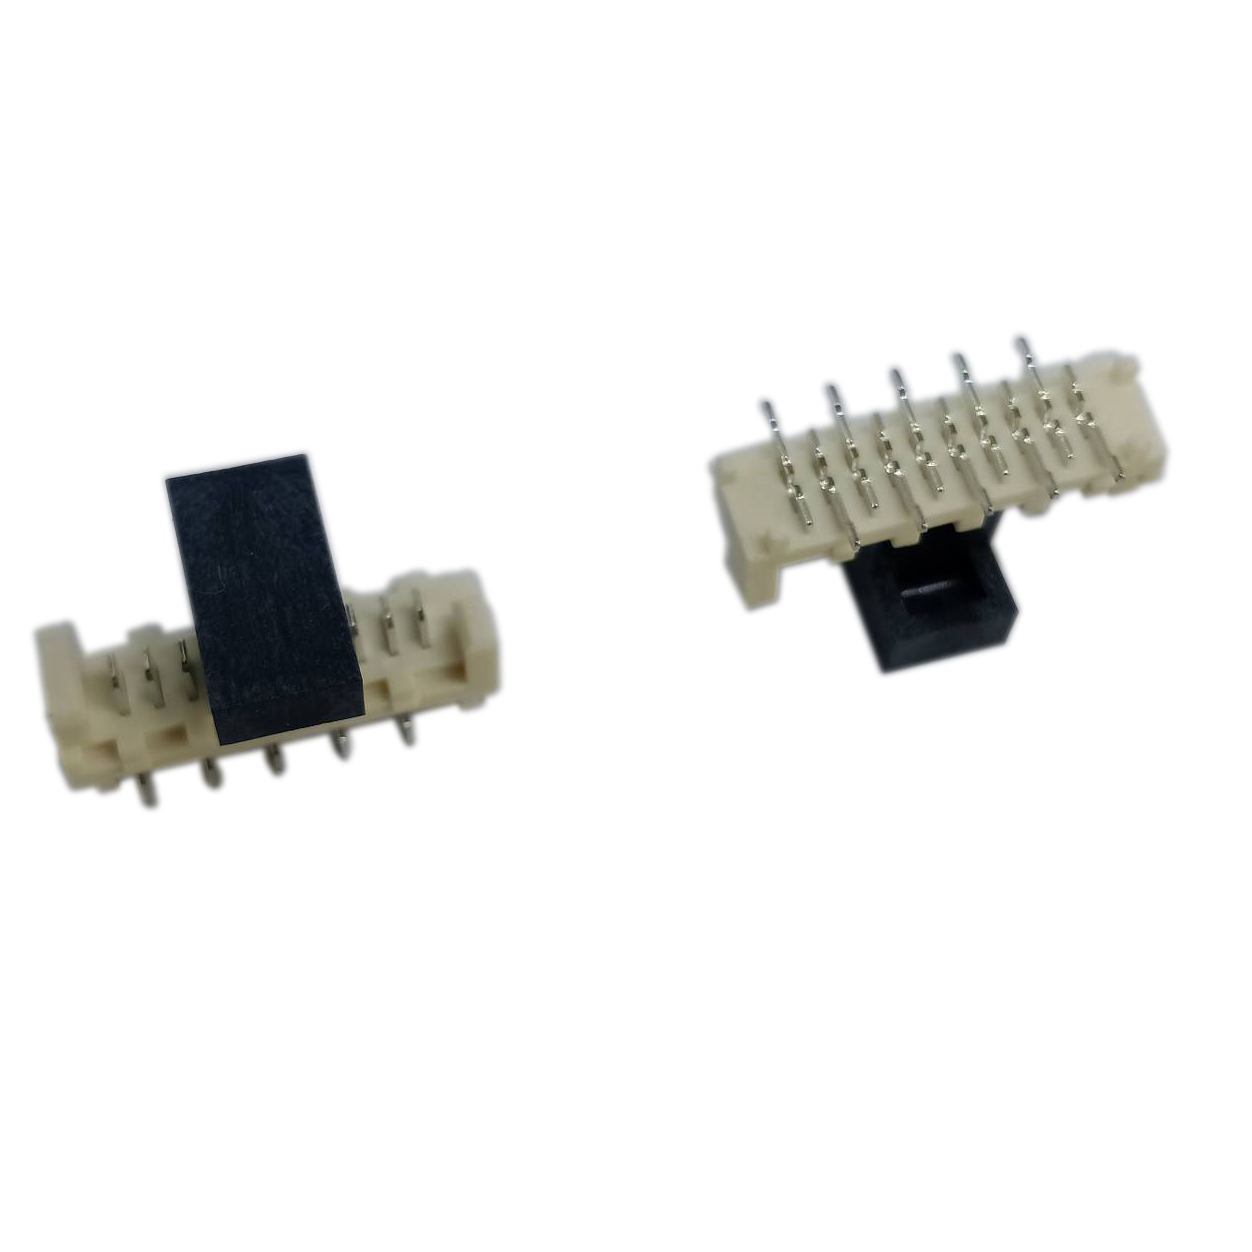 Molex 90814: Redefine connectivity with precision and reliability. Elevate devices with seamless performance in electronic connections.